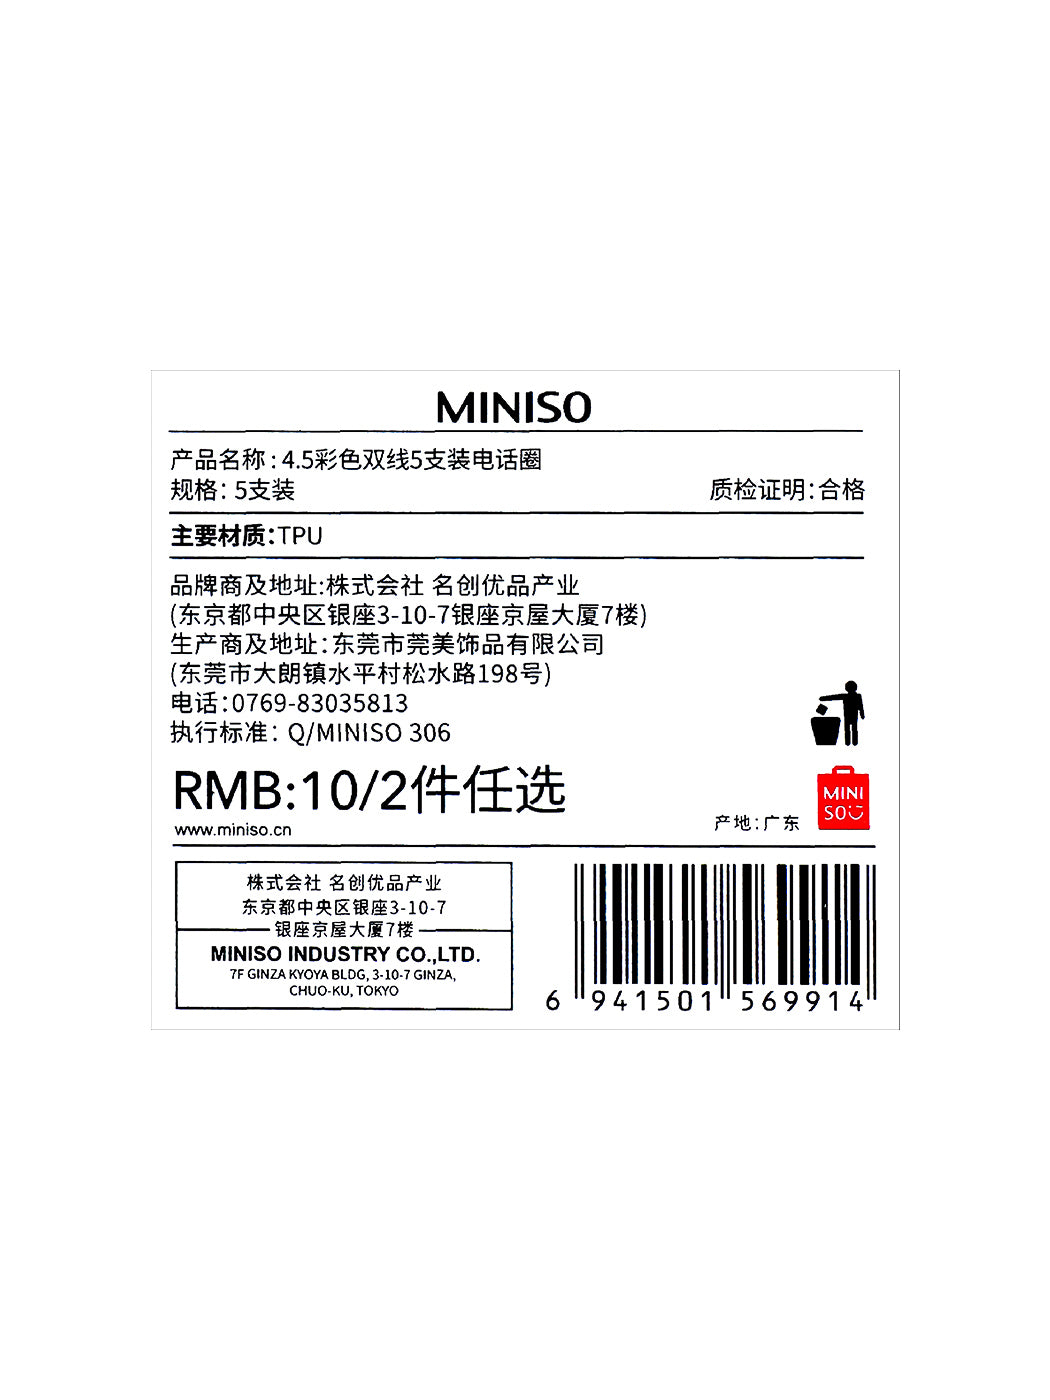 MINISO 4.5 COLORED SPIRAL HAIR TIES (5PCS) 2007225410100 HAIR TIE